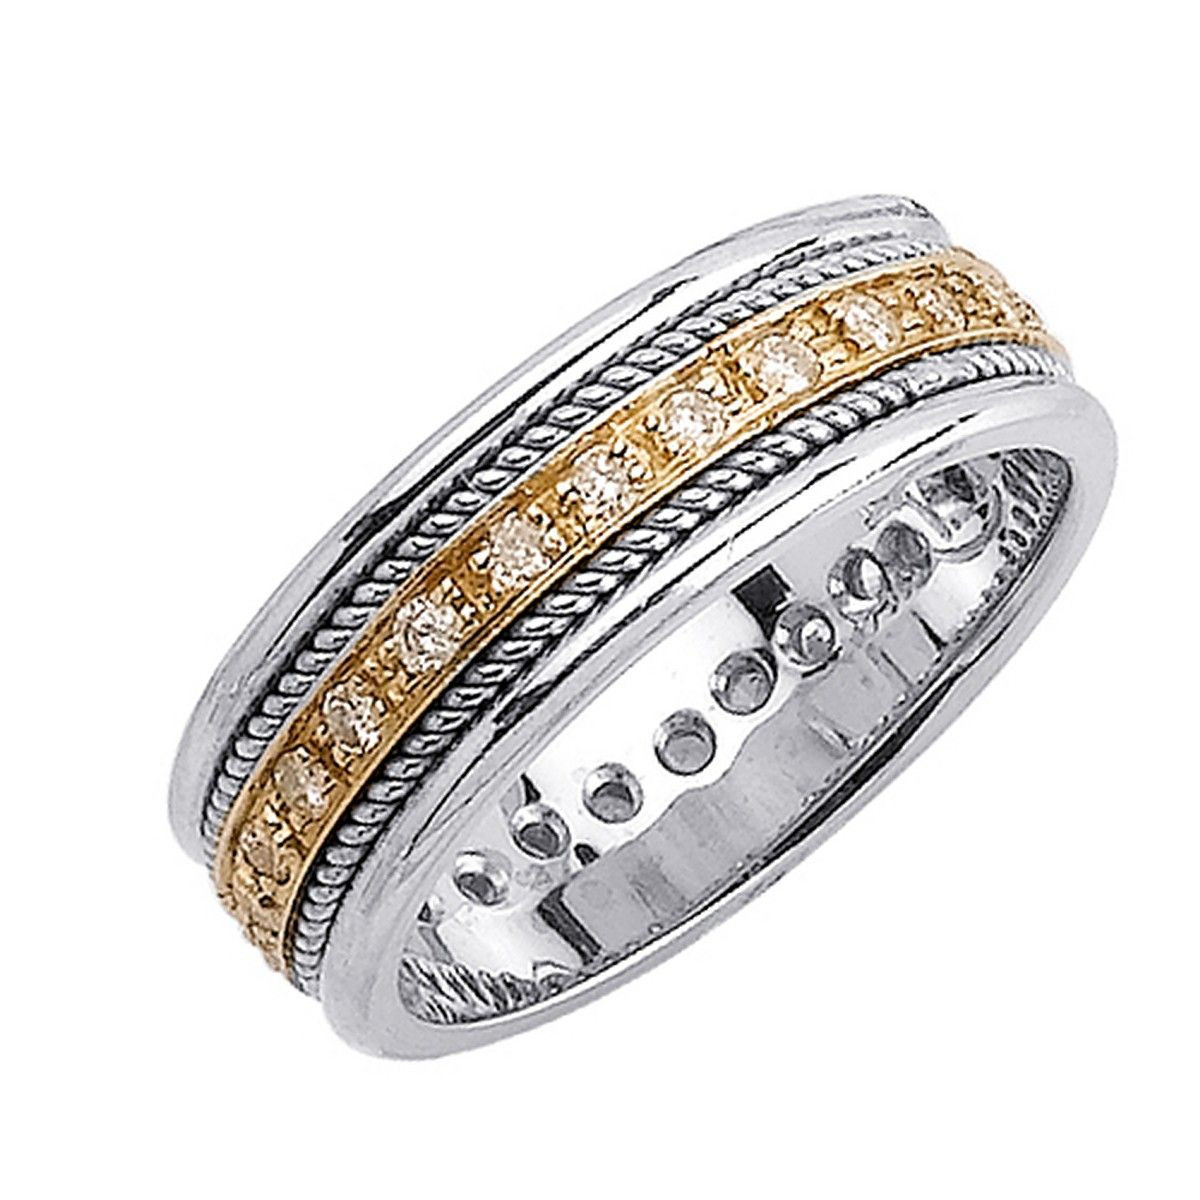 Mens Wedding Bands Gold With Diamonds
 Mens Wedding Bands